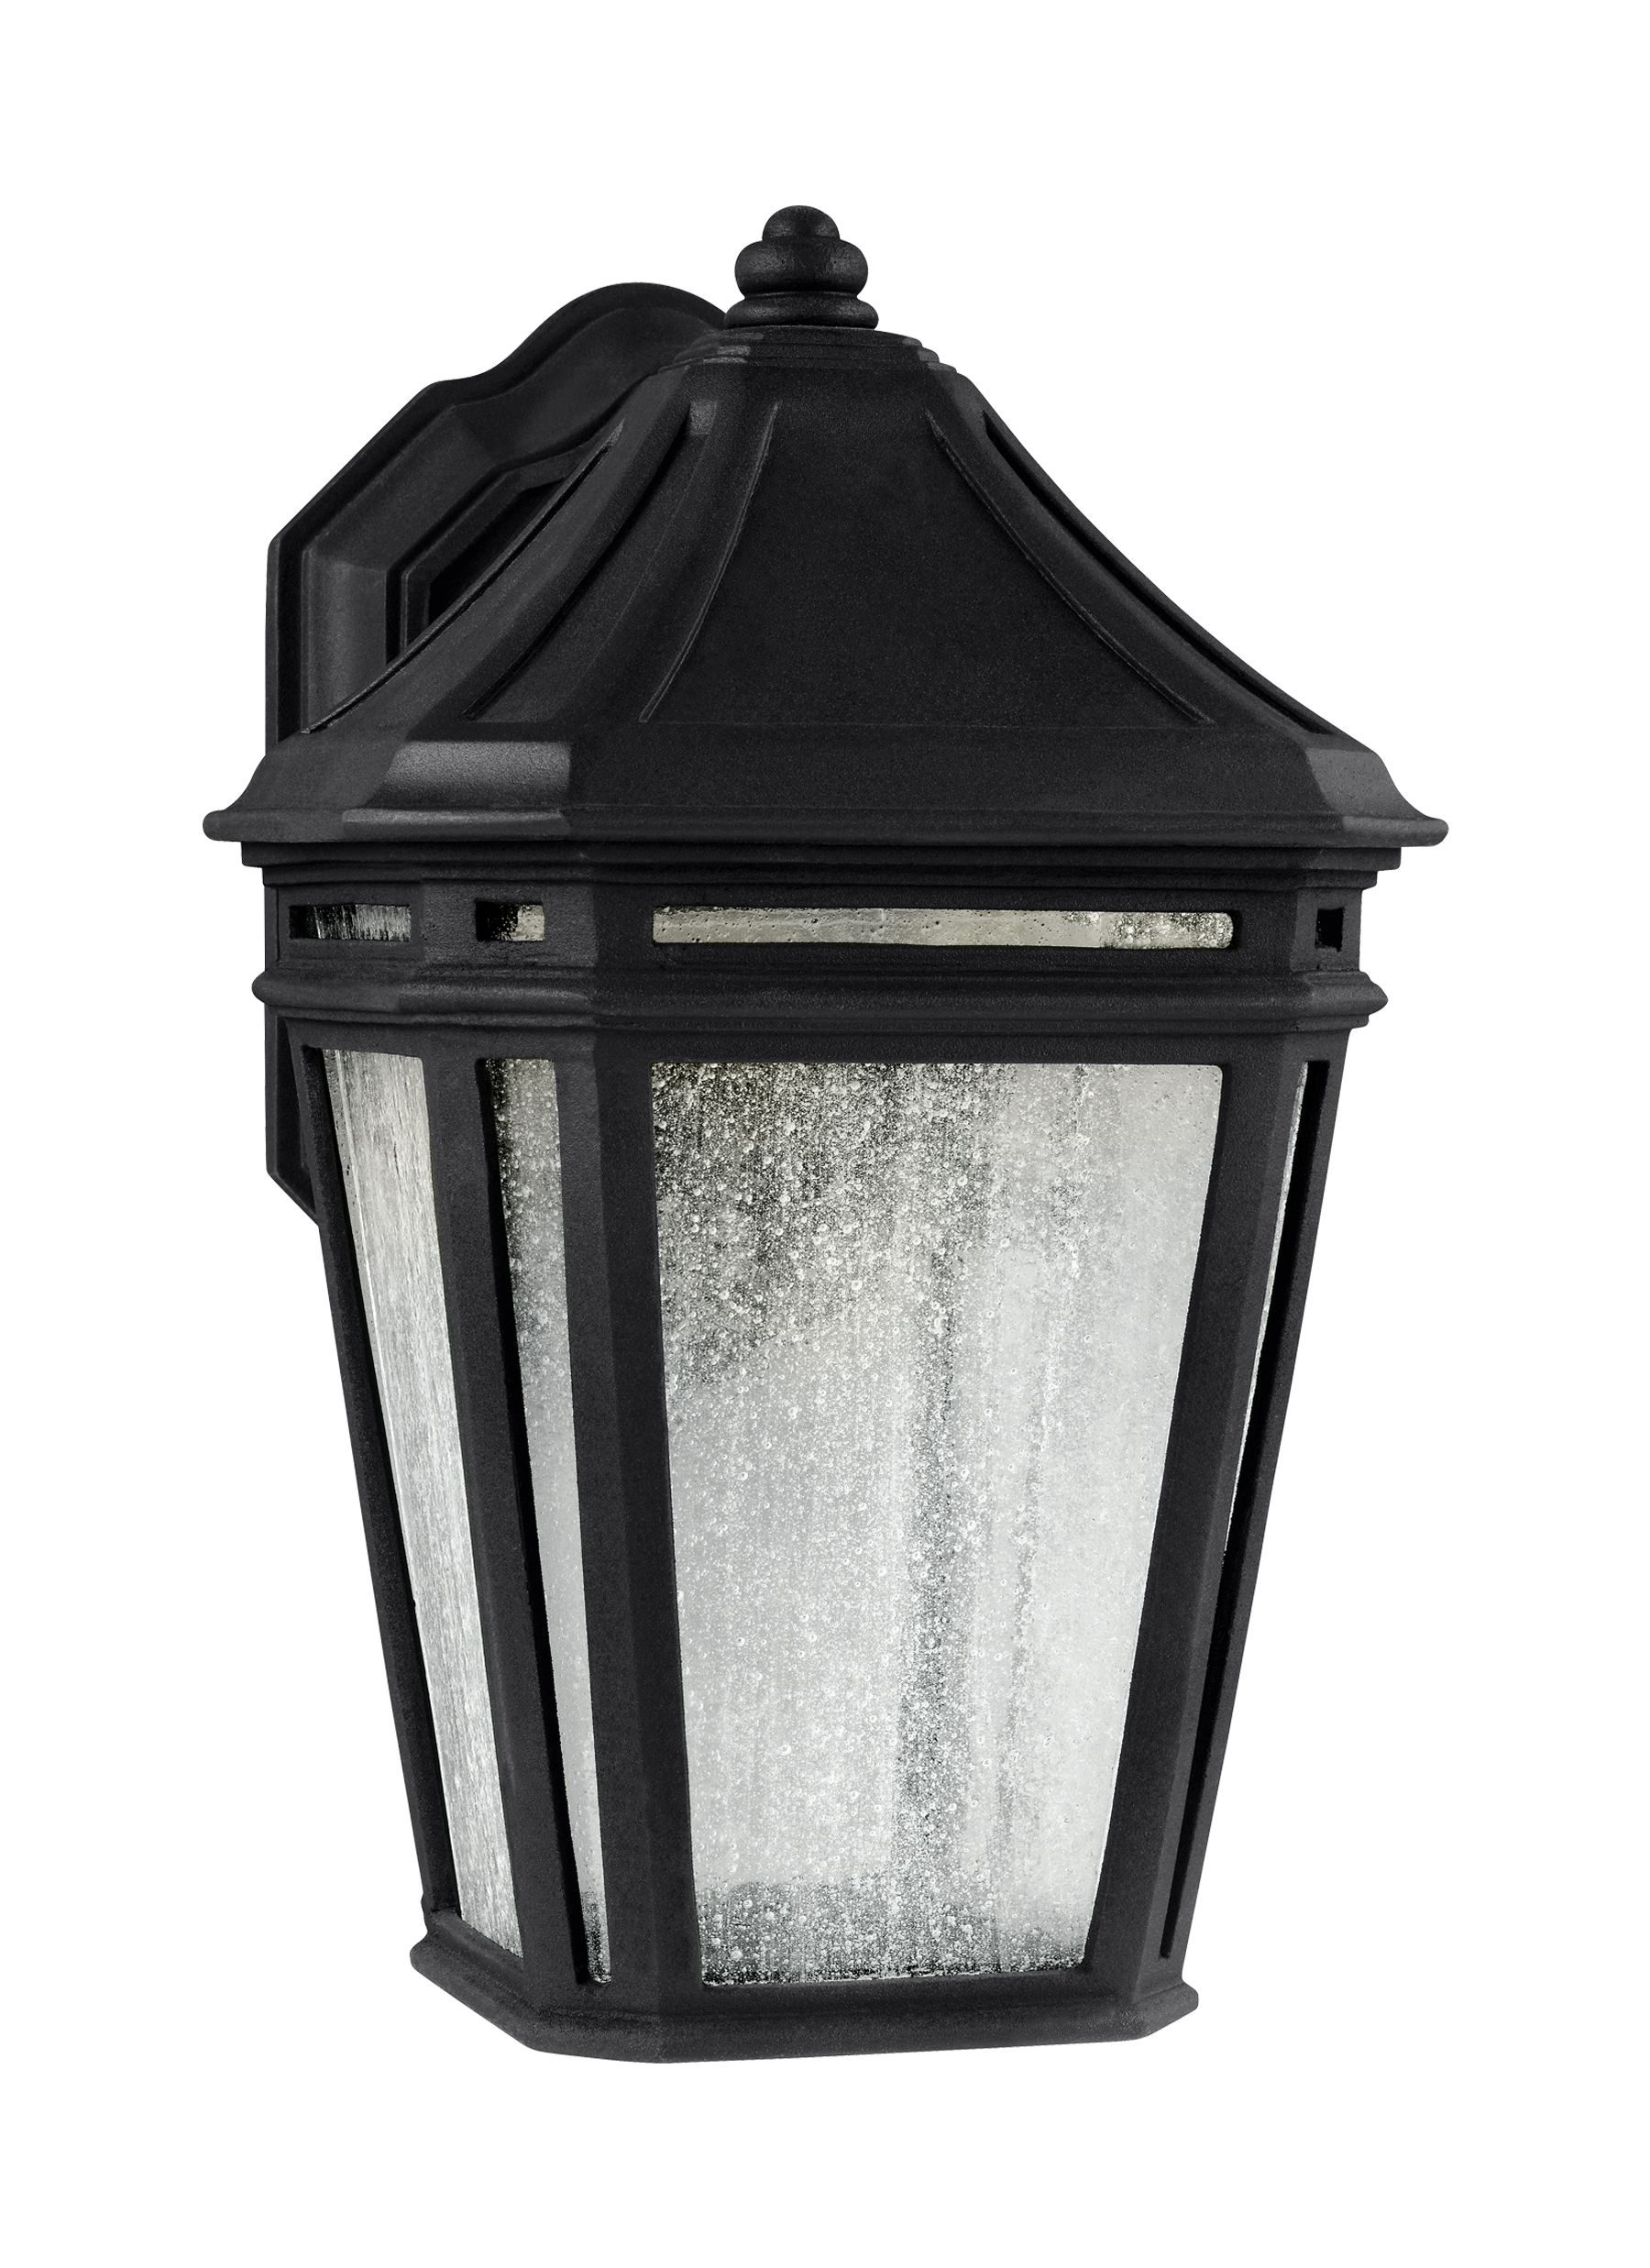 Ol11302bk Led,led Outdoor Sconce,black Pertaining To Led Outdoor Lanterns (View 4 of 20)